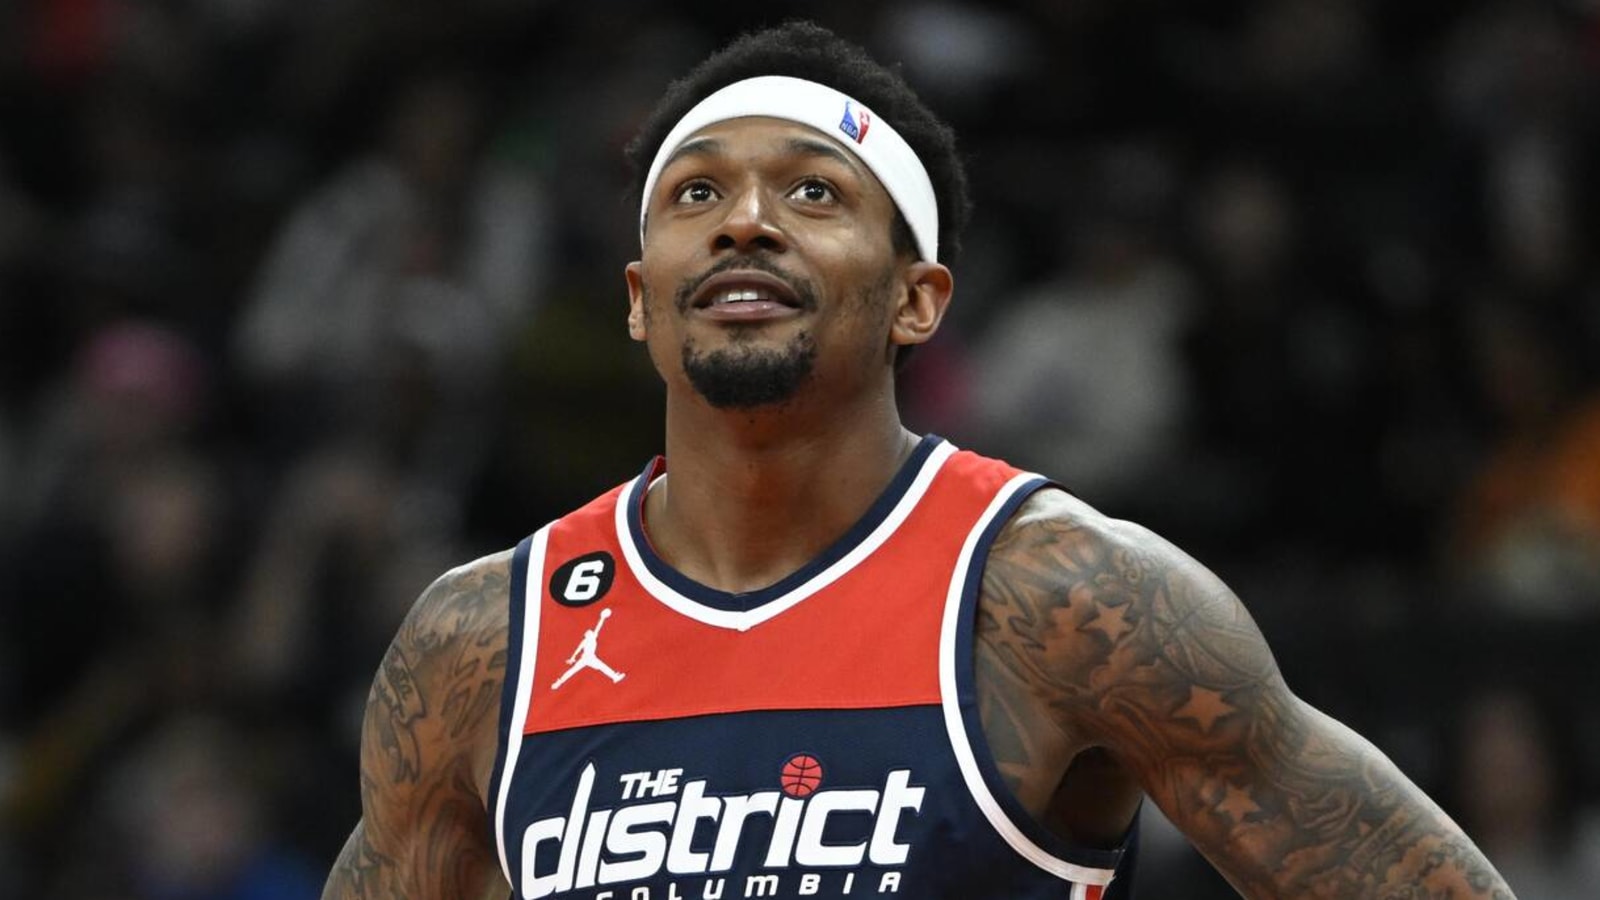 New information surfaces about Bradley Beal’s incident with fan